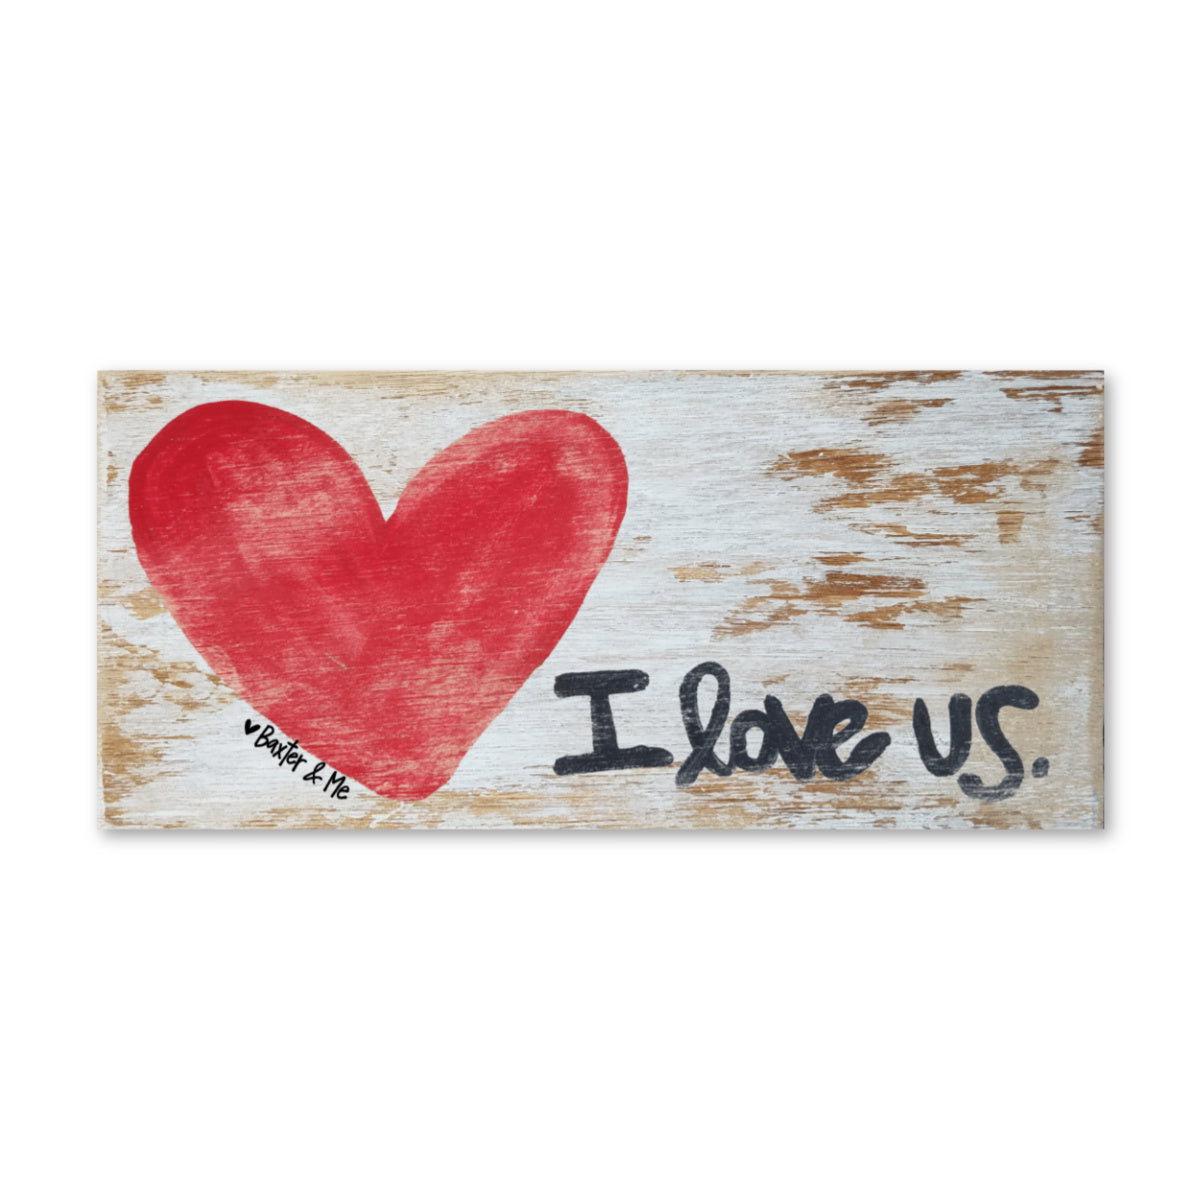 I Love Us - Wrapped Canvas, 12" x 24"